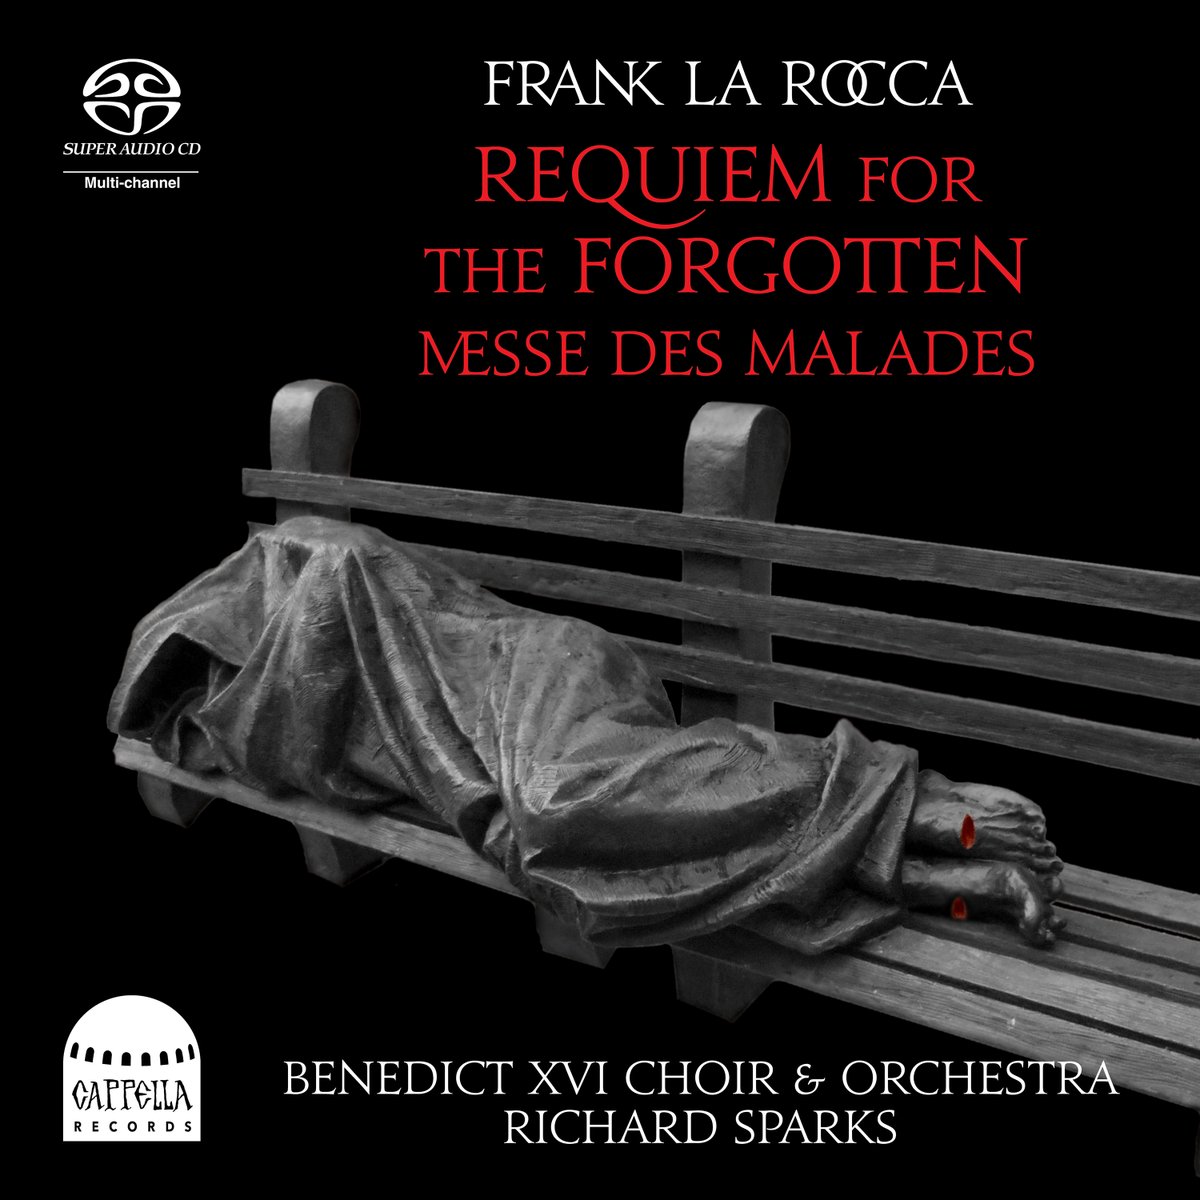 The Benedict XVI Institute for Sacred Music and Divine Worship's March 15 release of Frank La Rocca's Requiem for the Forgotten & Messe Des Malades is now available for pre-order on Amazon! Add it to your cart today: amzn.to/3wvGq7M